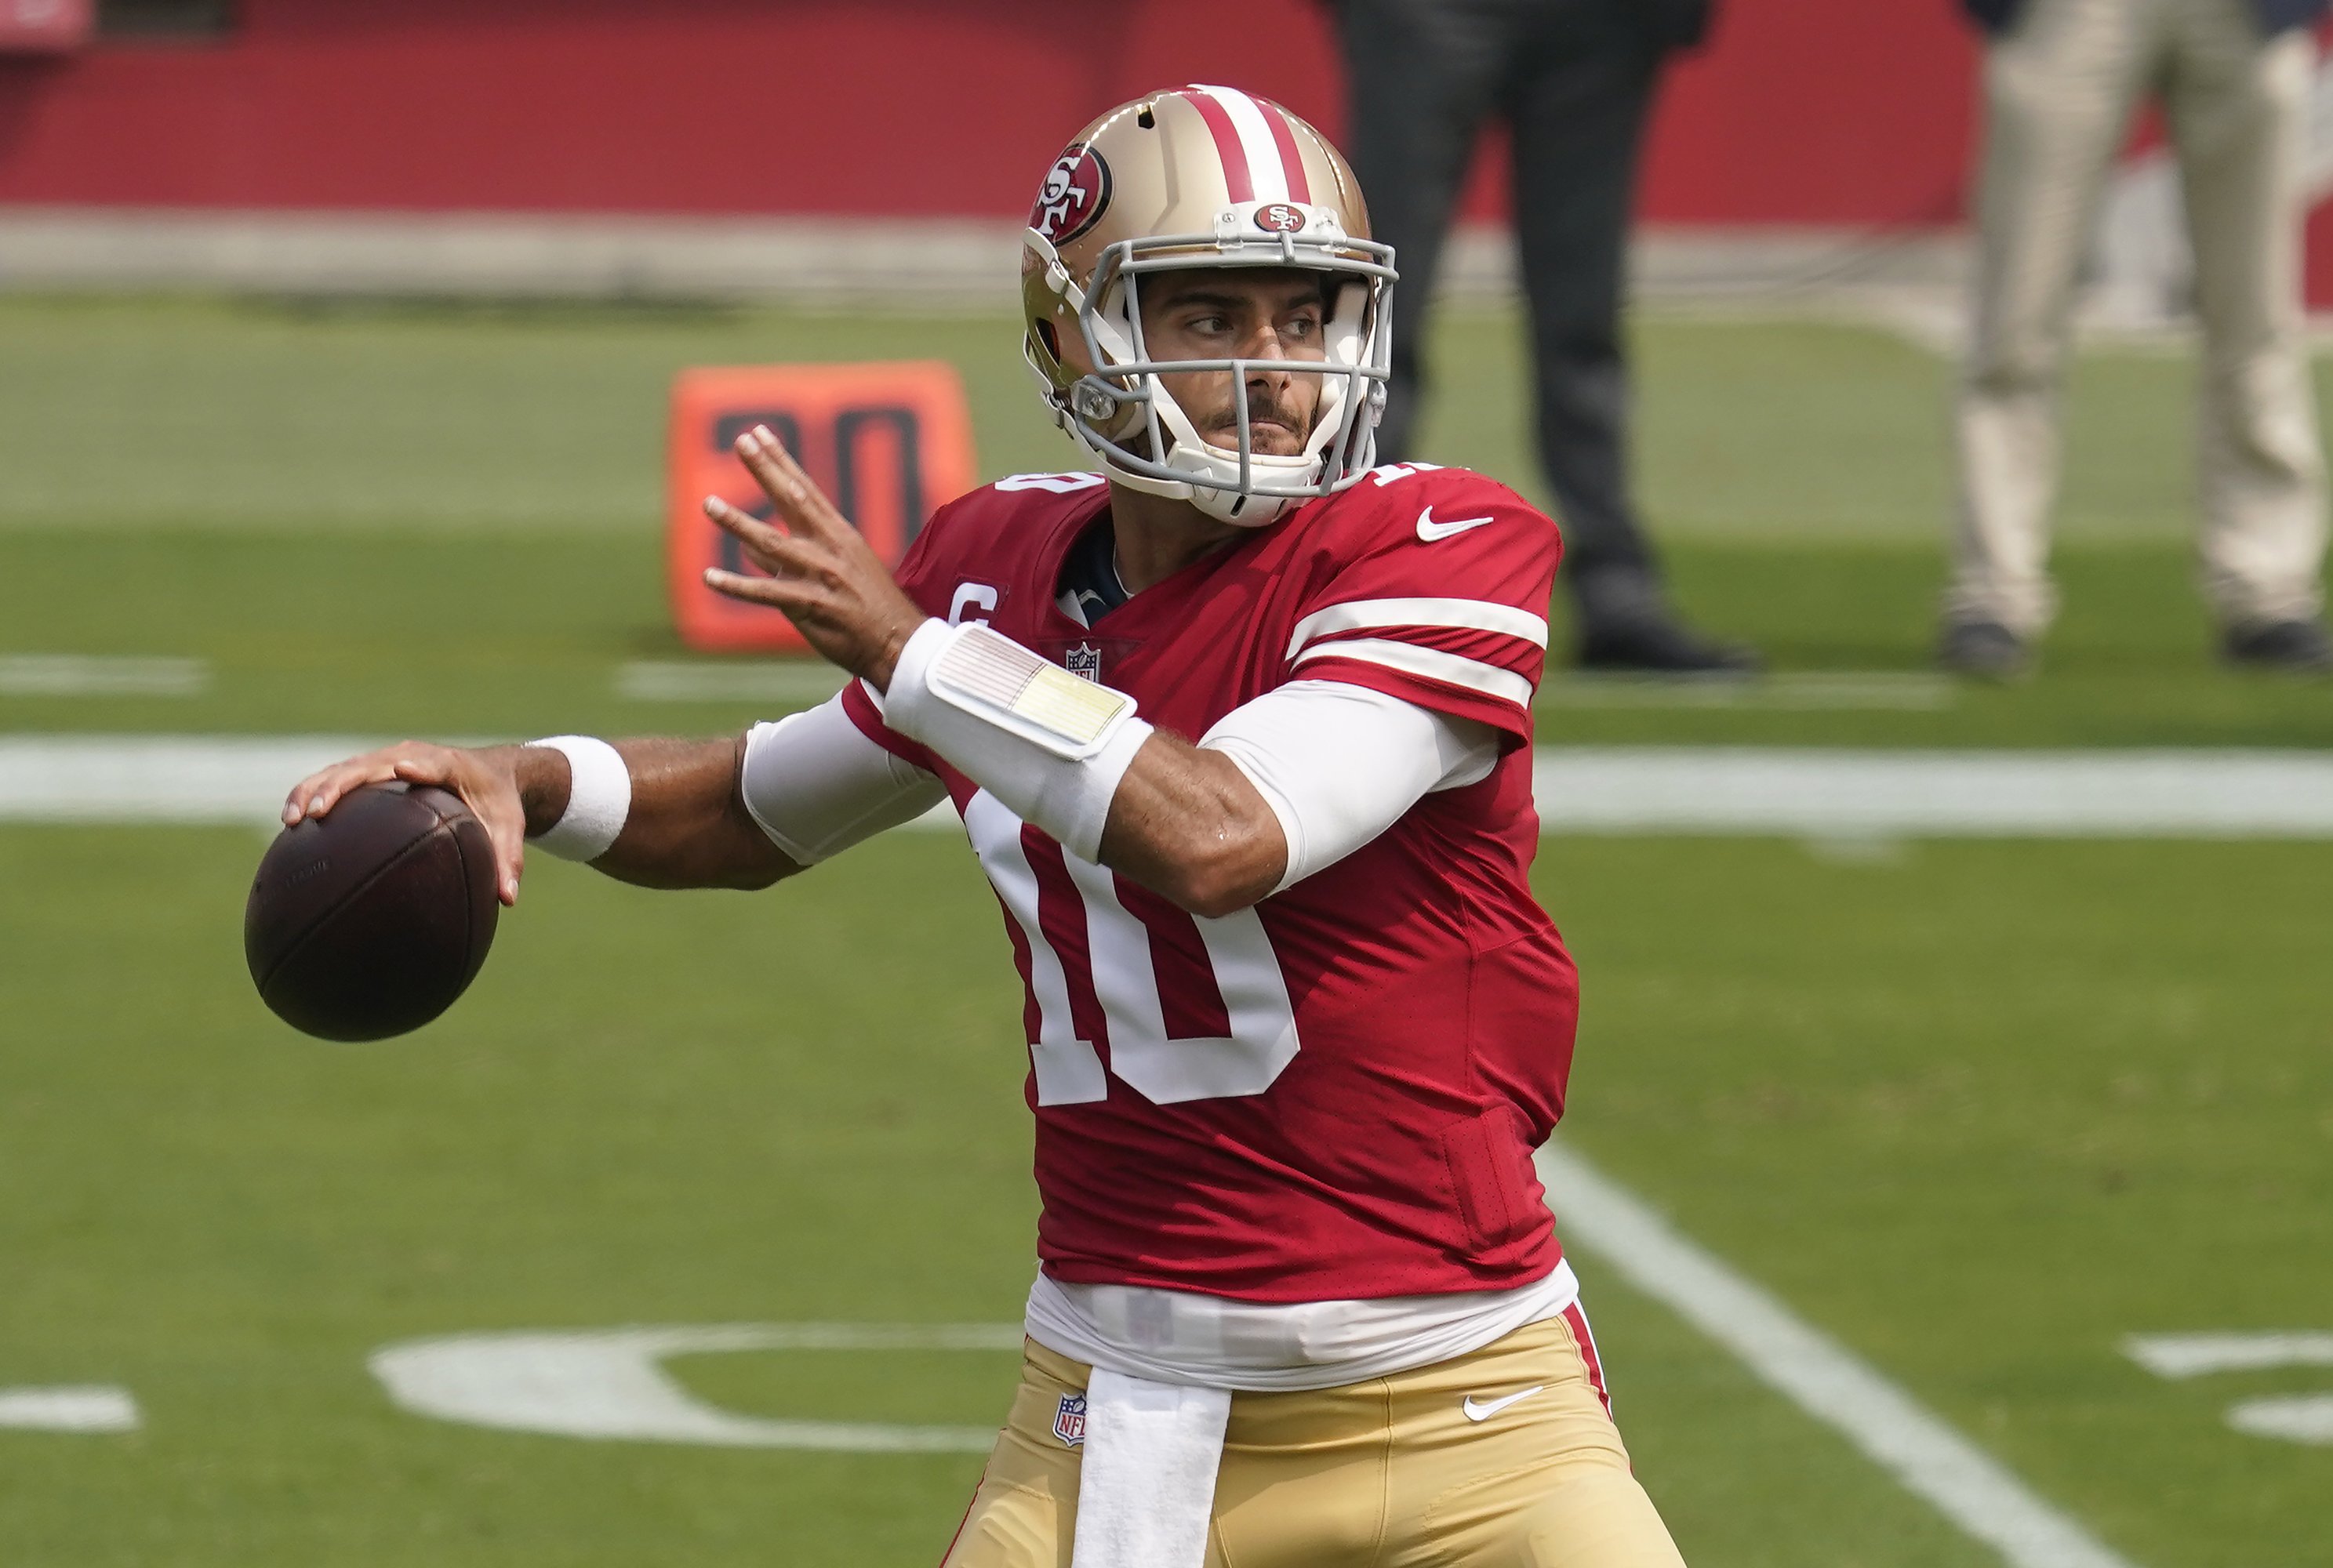 49ers game review: It's way too early to panic, but that was